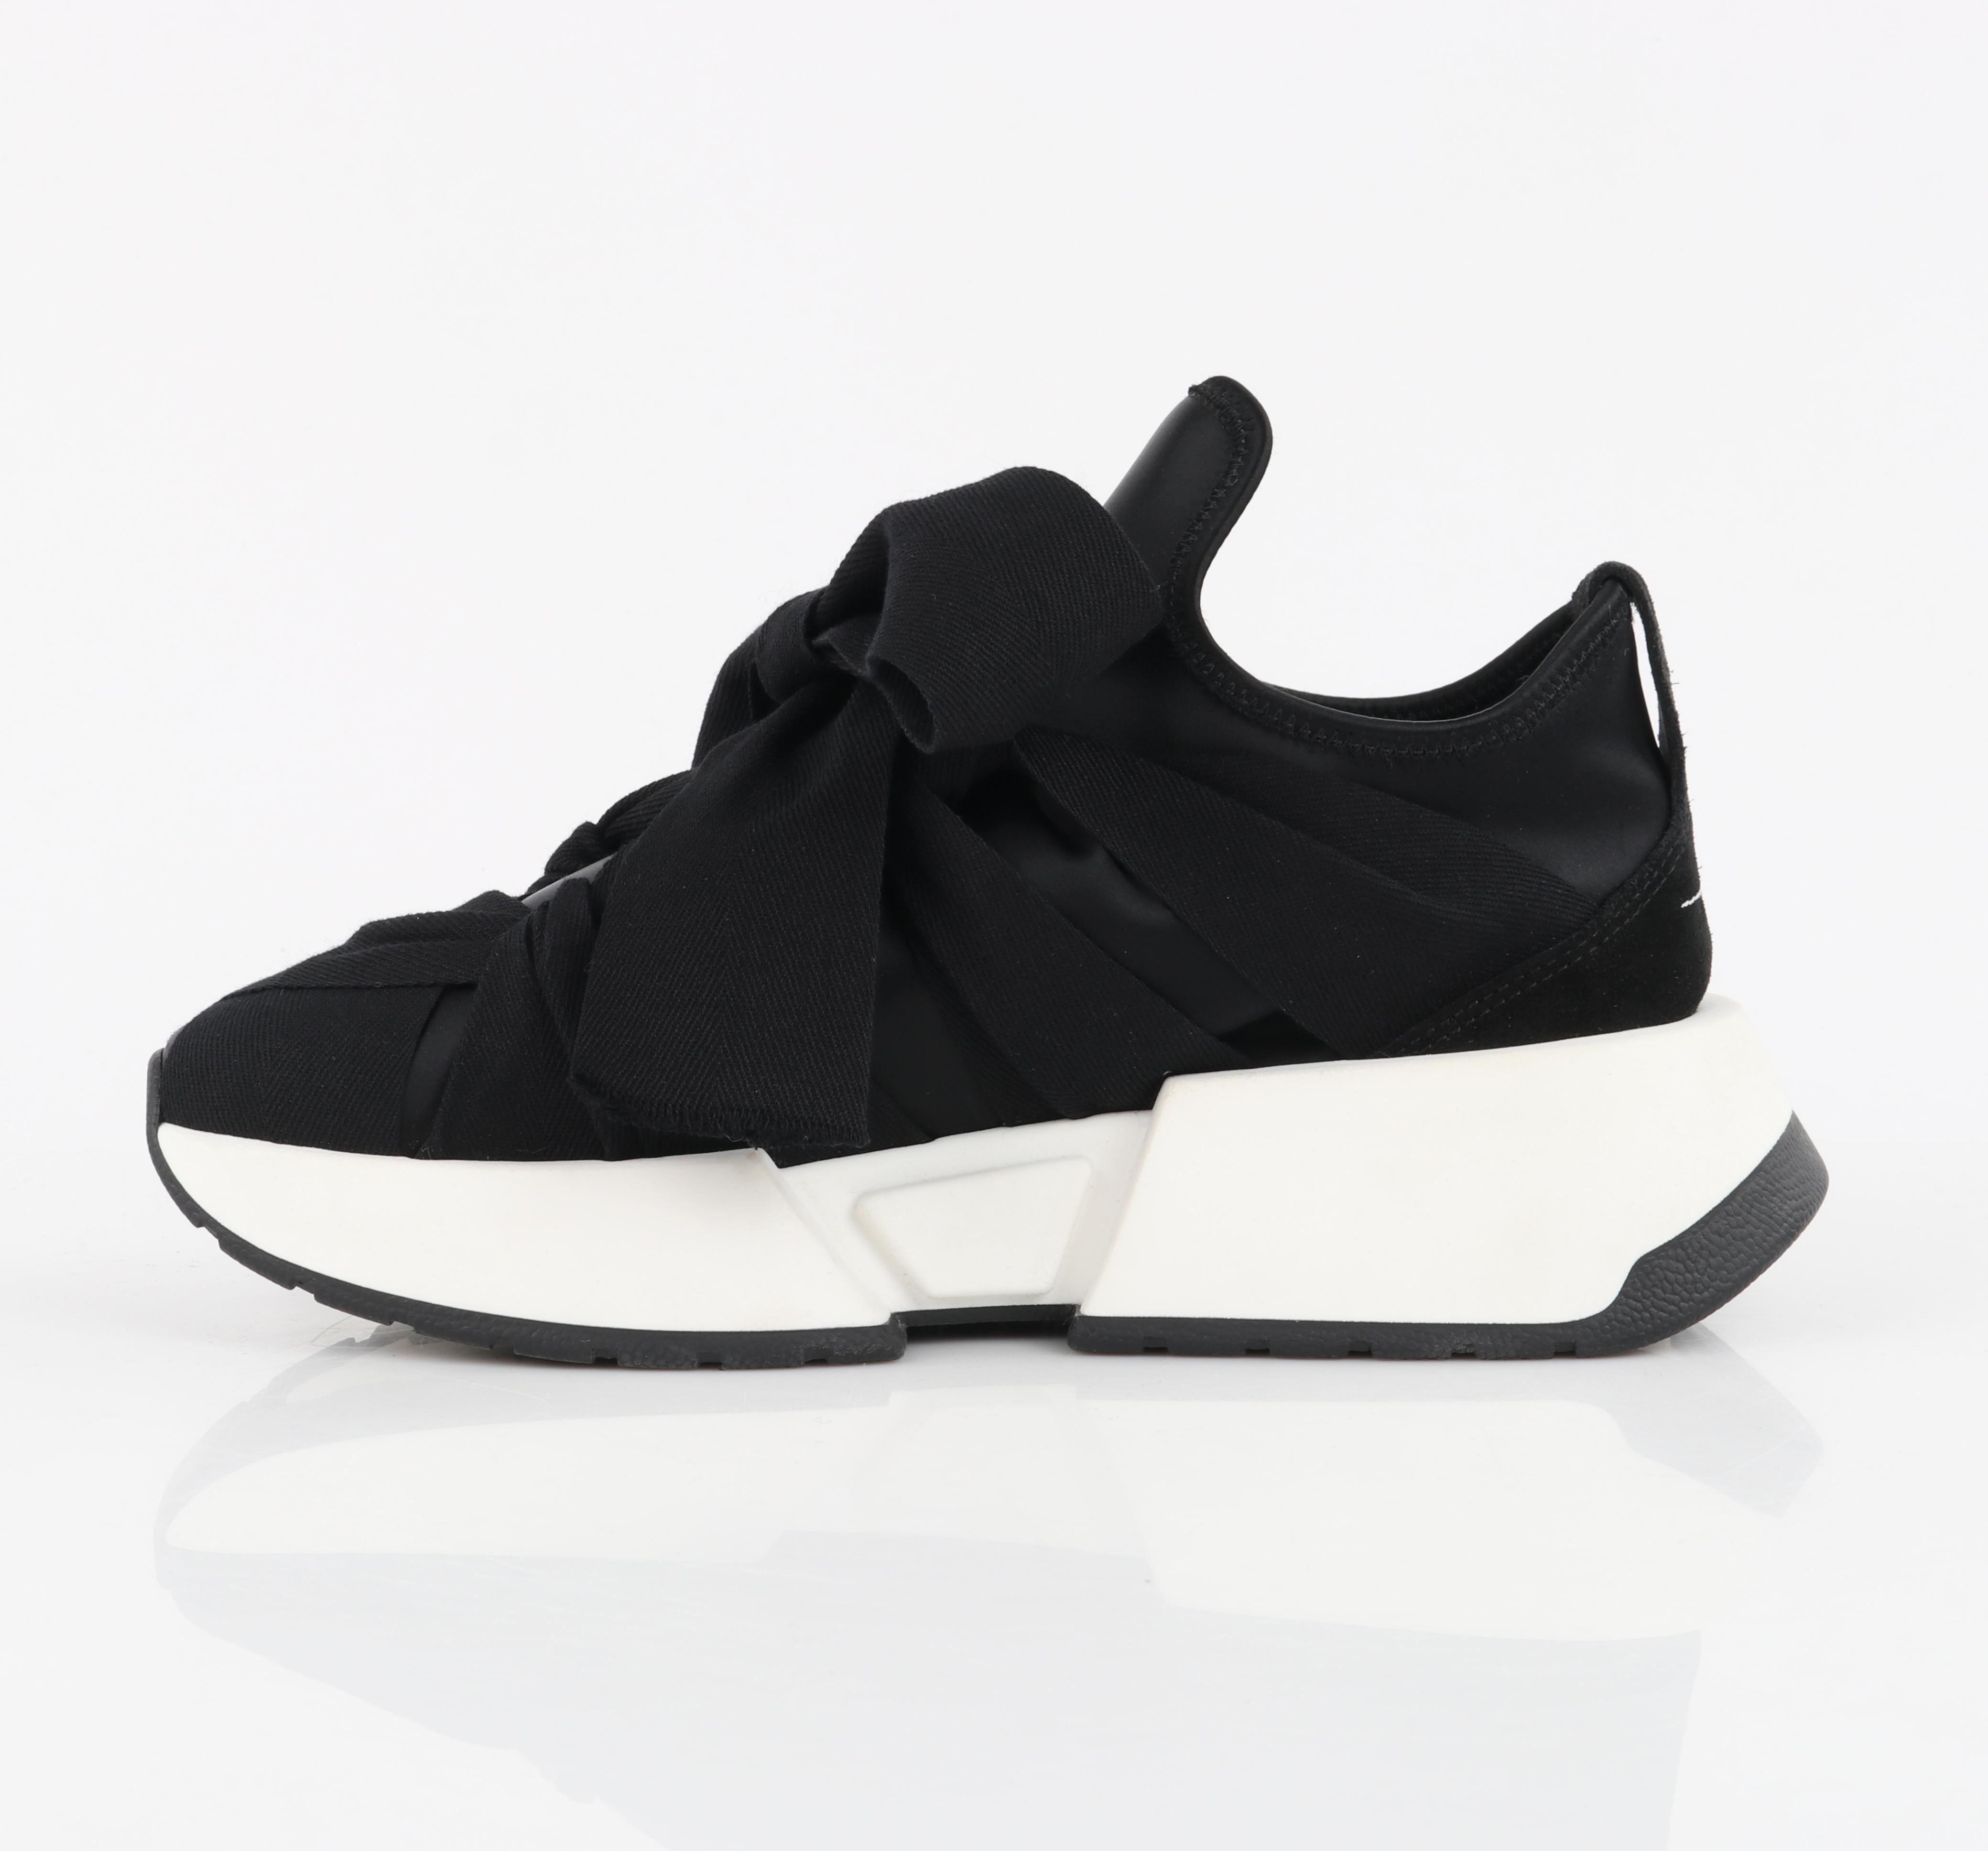 MM6 MAISON MARGIELA c.2019 Black White Platform Ribbon Bow Wrap Sneaker Shoes In Good Condition For Sale In Thiensville, WI